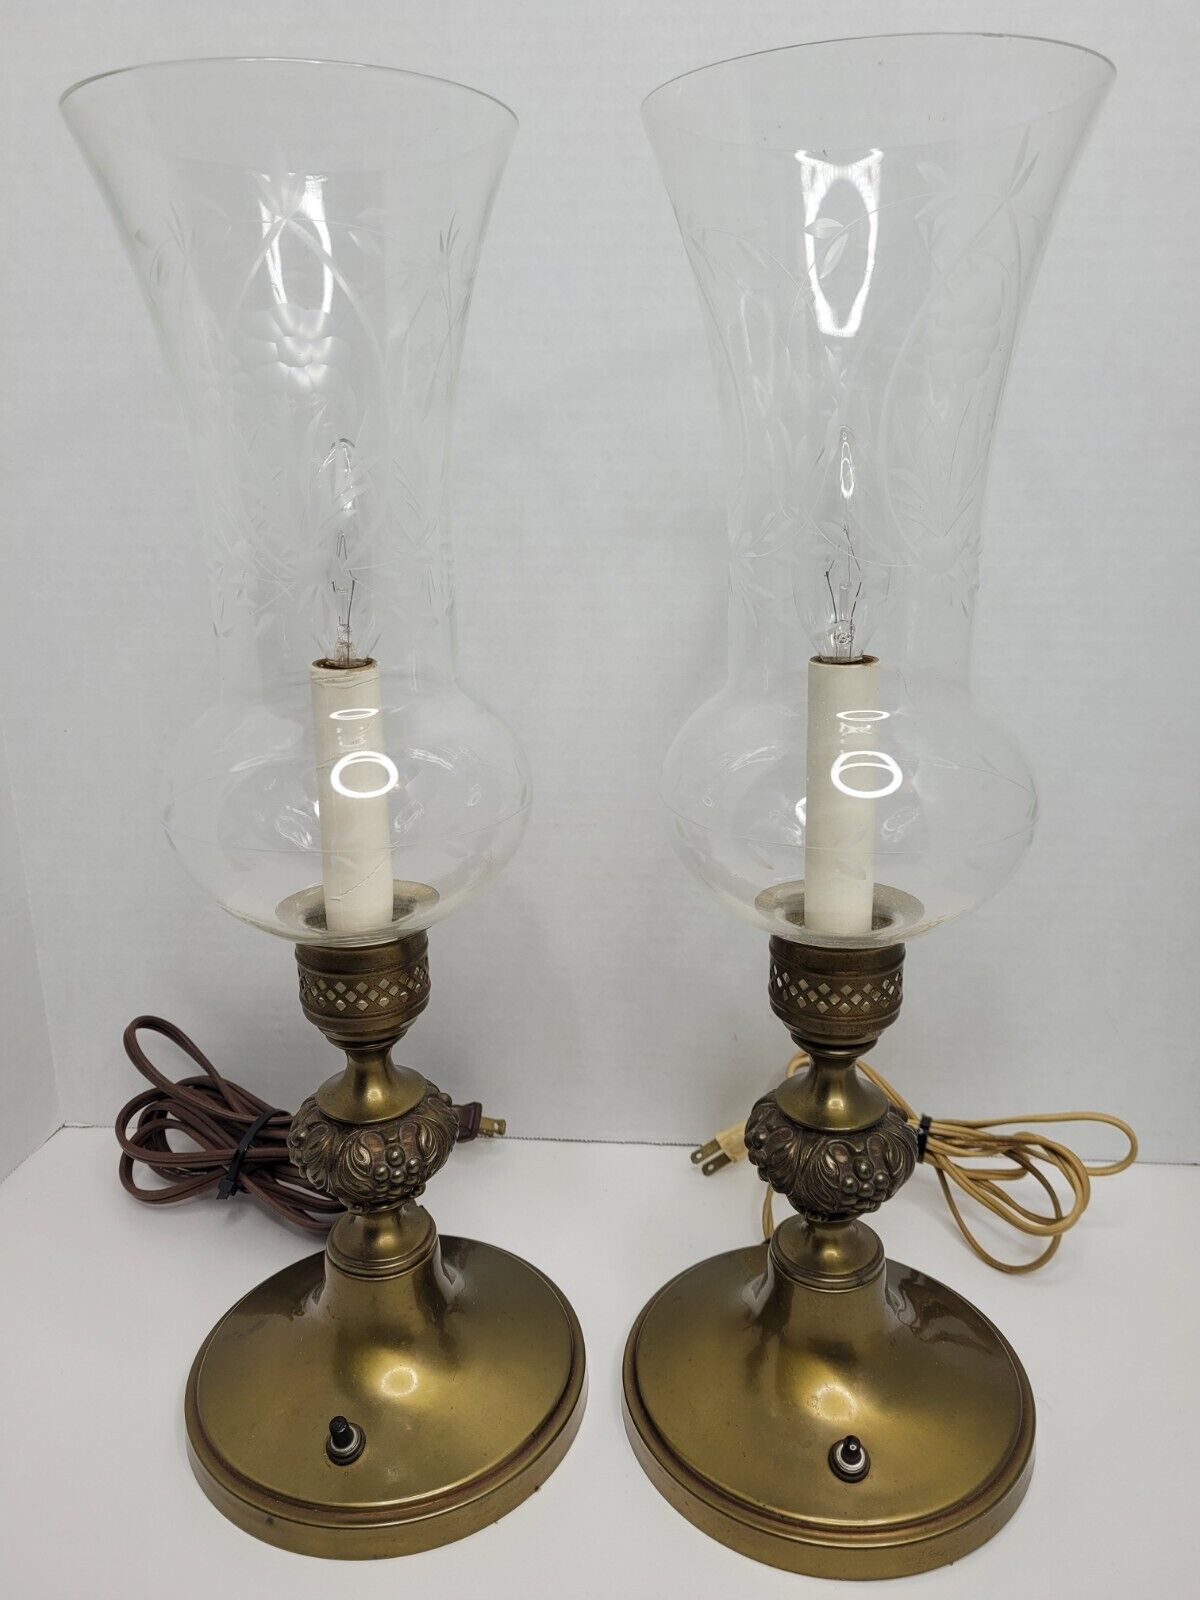 Vtg Pair Antique Etched Glass Hurricane Mantle Boudoir Ornate Brass Lamps Candle